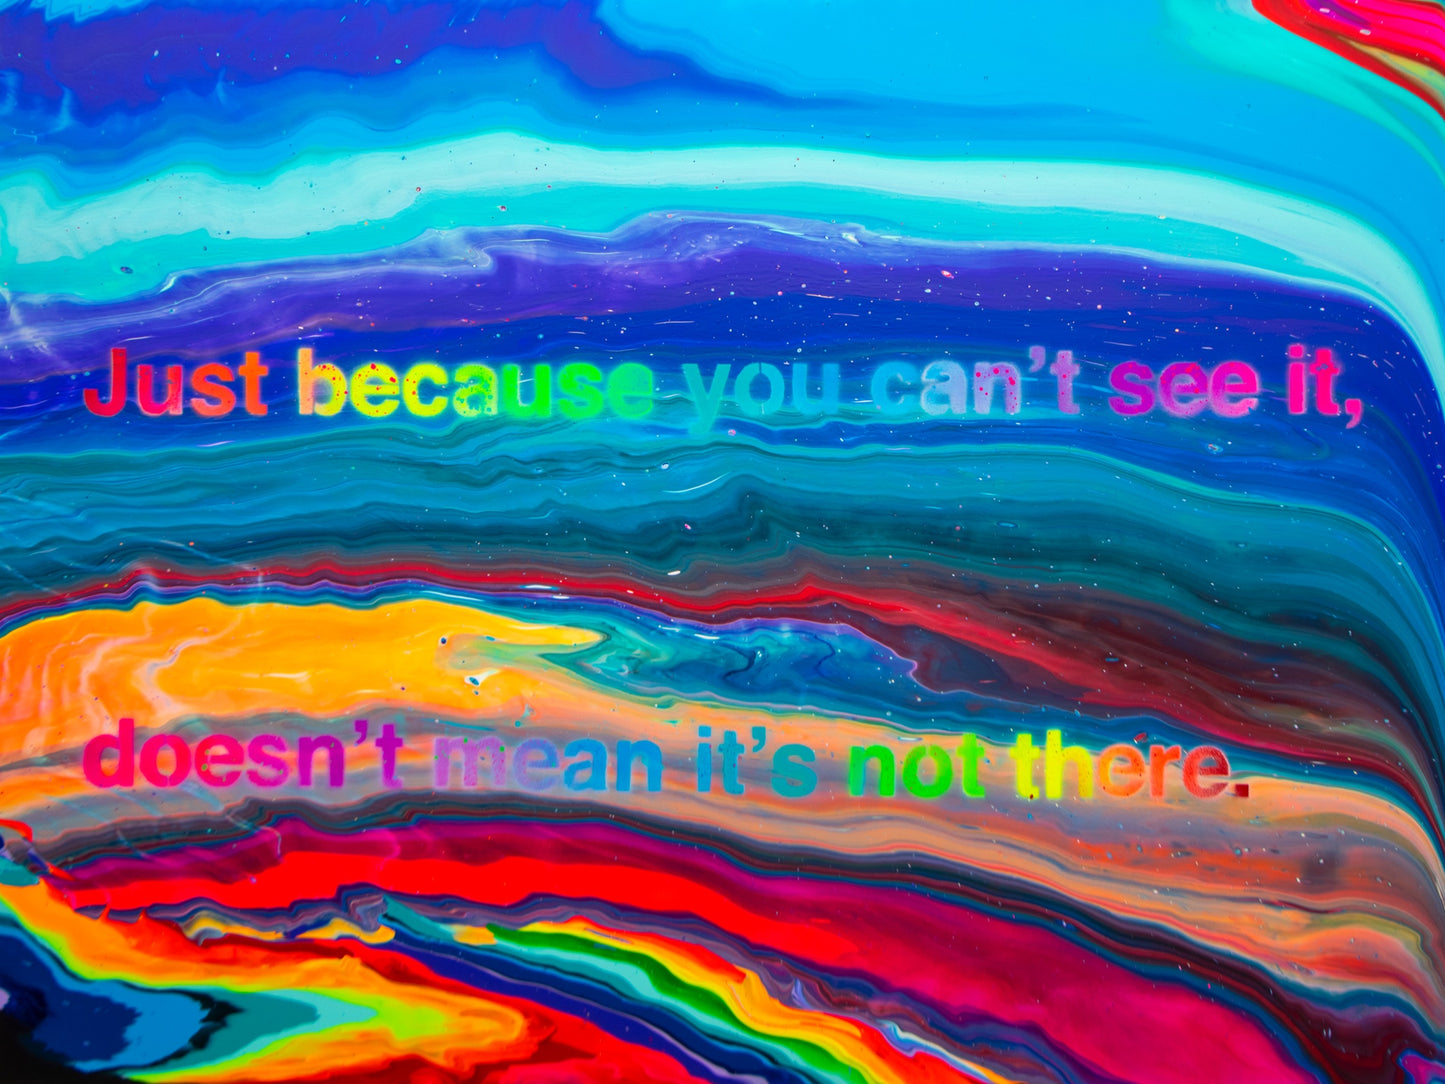 Just because you can’t see it, doesn’t mean it’s not there.